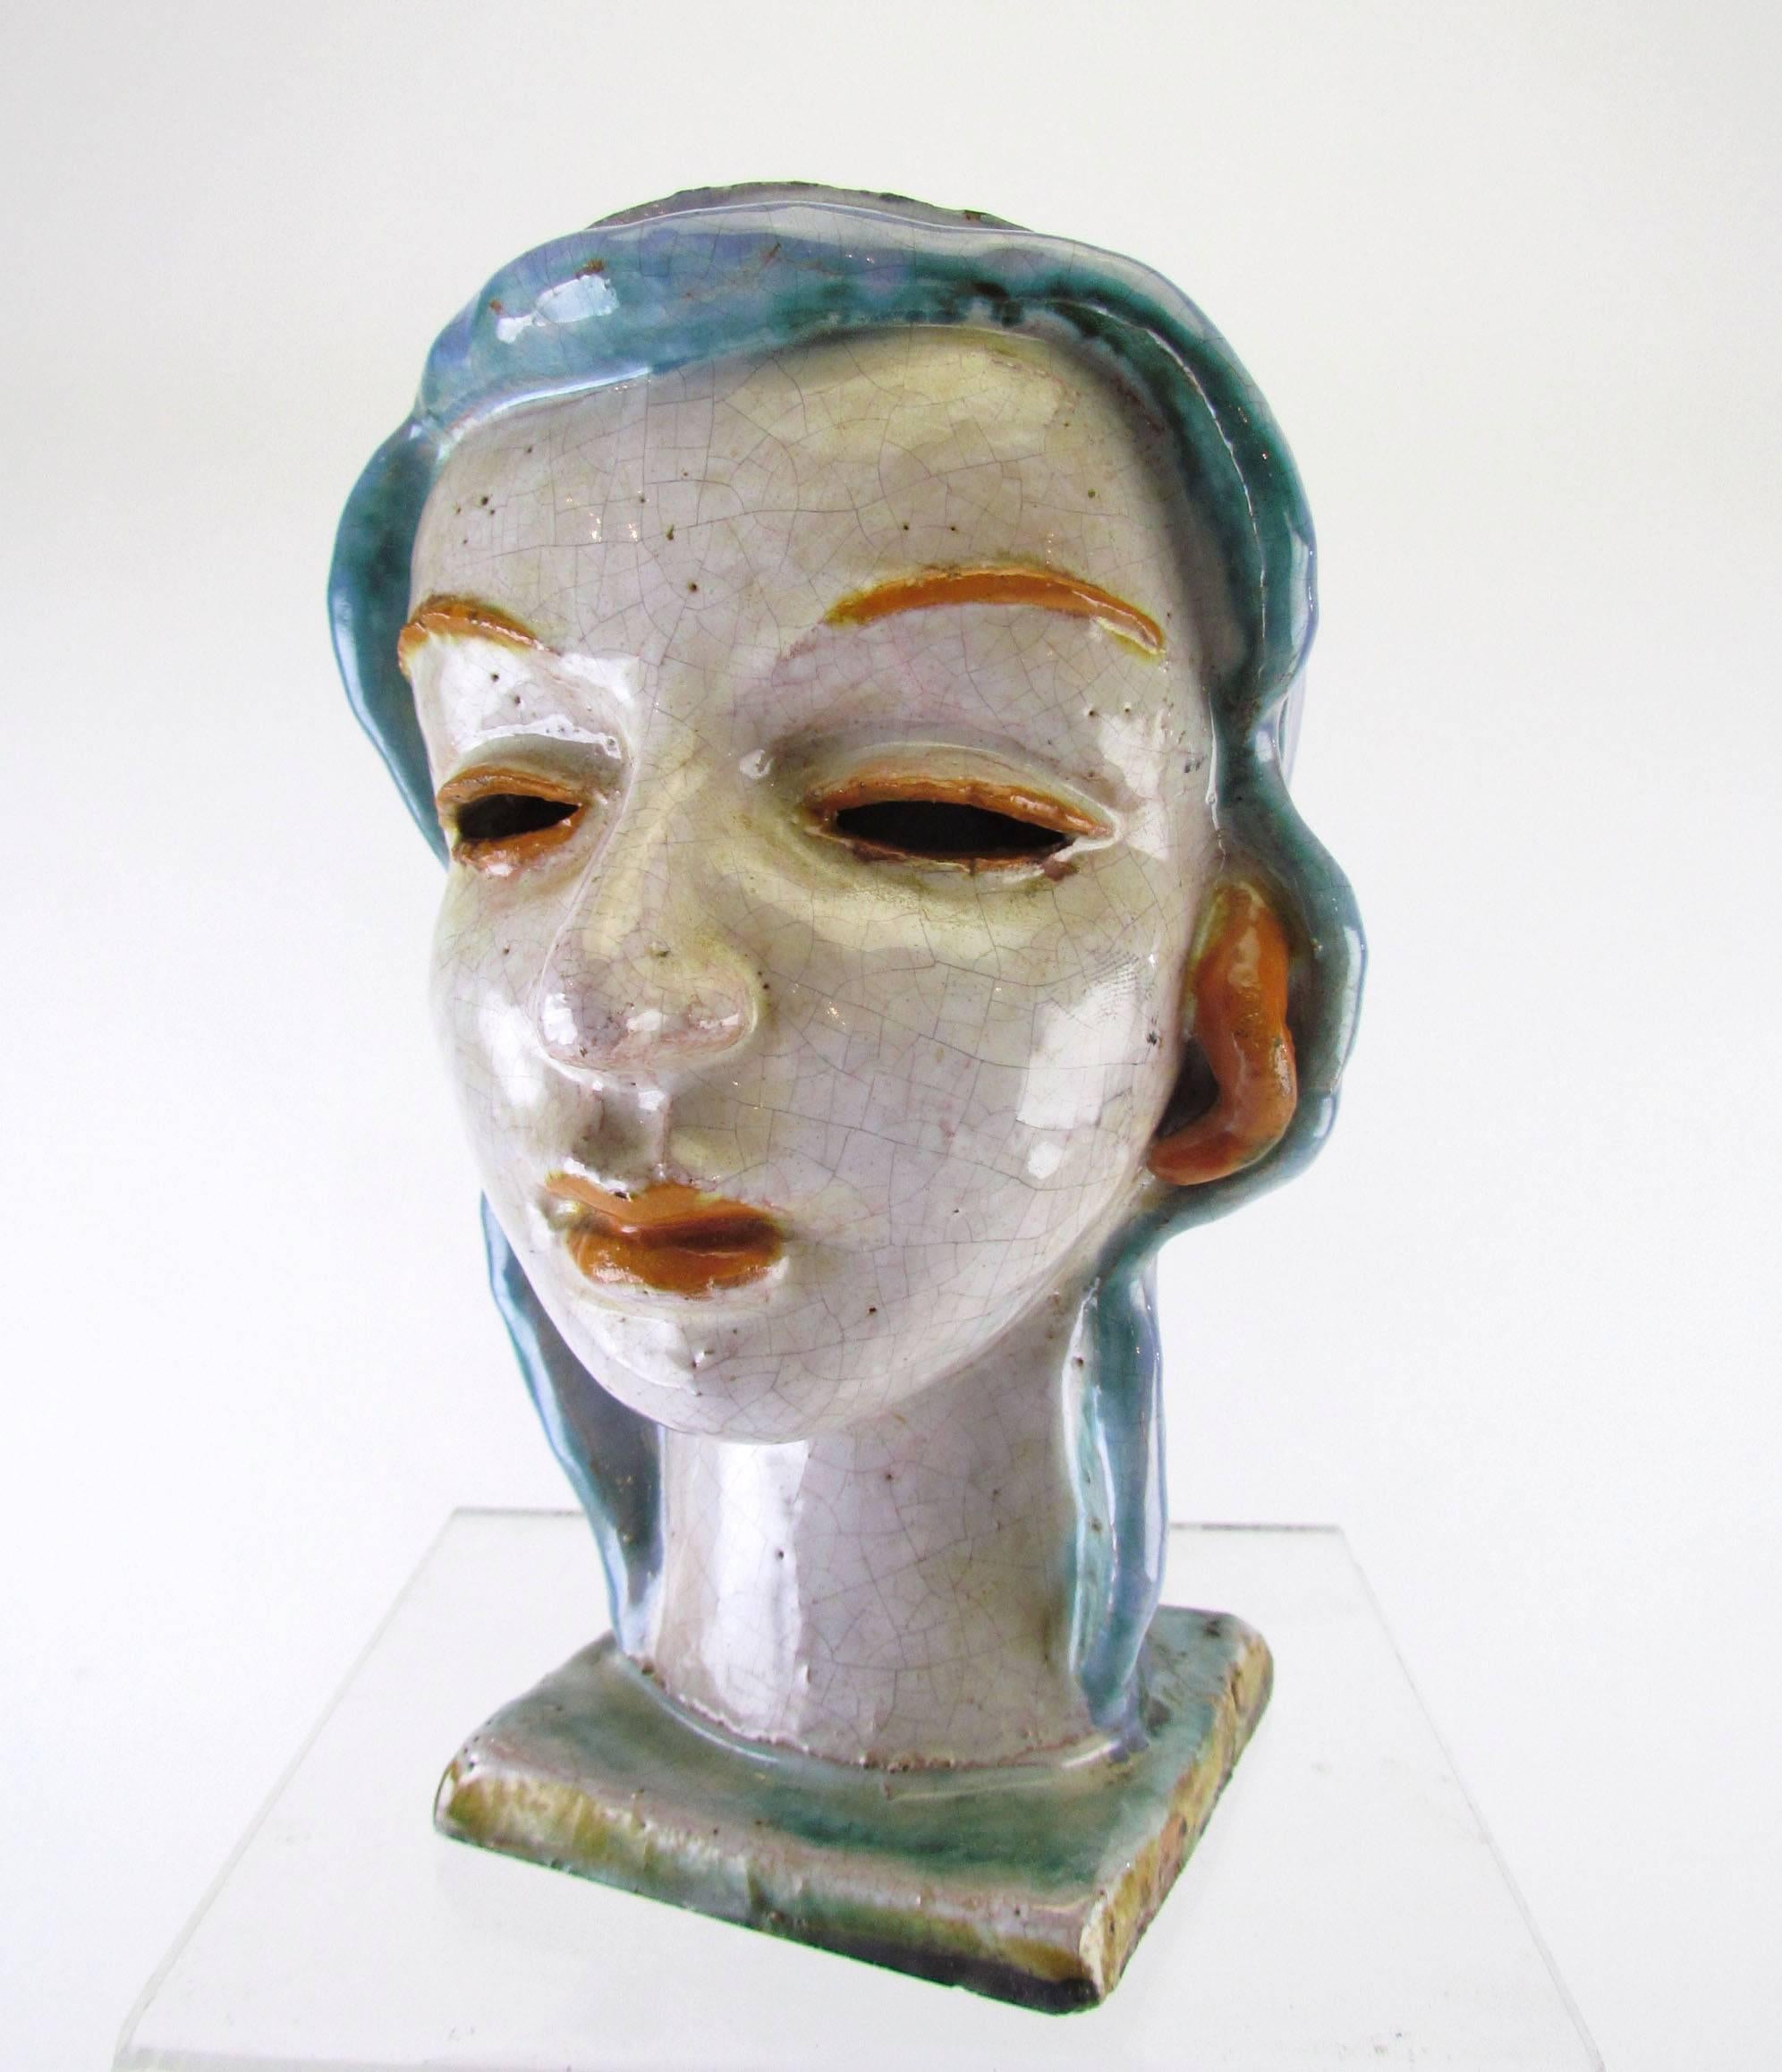 Wonderful sculpture of a head of a woman, in hand glazed and molded terracotta, marked "Made in Austria", in the manner of Wiener Werkstatte or Goldscheider.